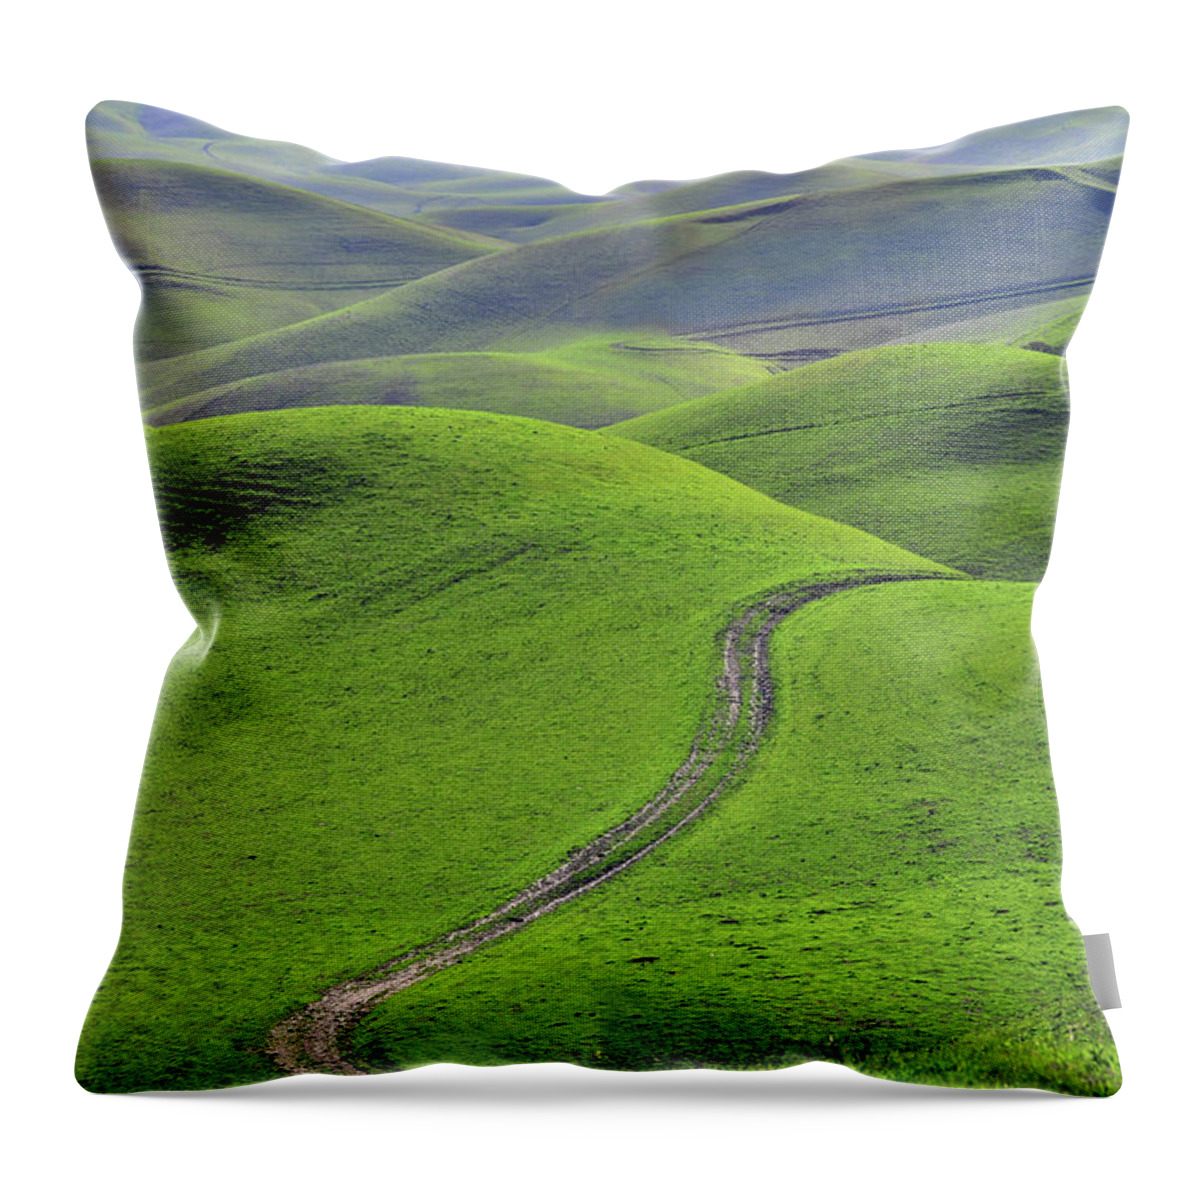 Scenics Throw Pillow featuring the photograph Green Hills With Road #1 by Mitch Diamond